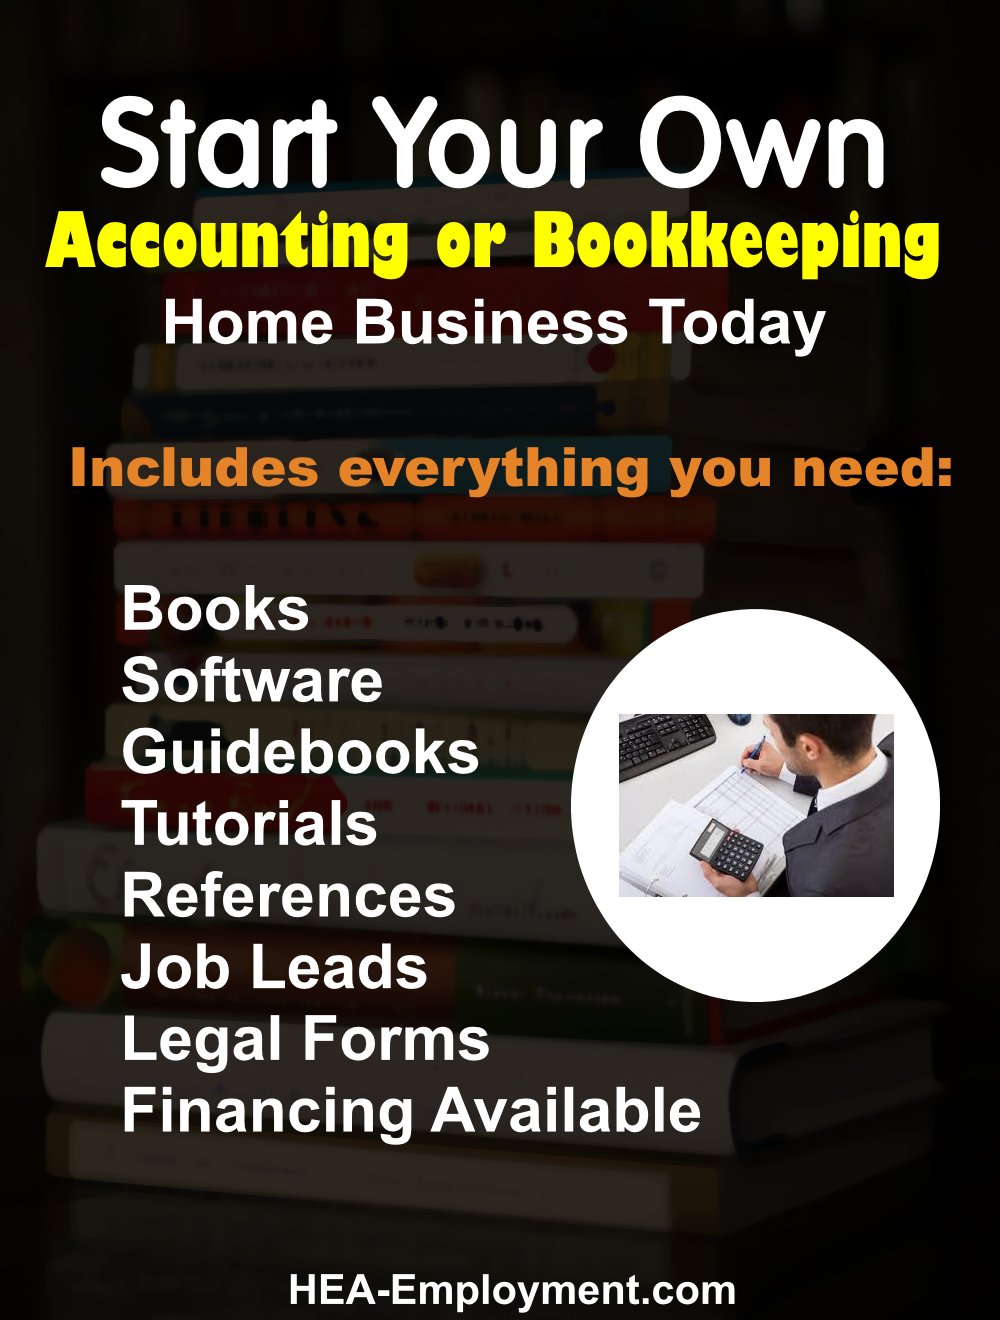 Start your own accounting and bookkeeping legitimate home based business. Fully equipped home business package with everything you need to get started. Productivity software, tutorials, guidebooks, references, manuals, tax advice and legal forms are included with each kit. Be your own boss!